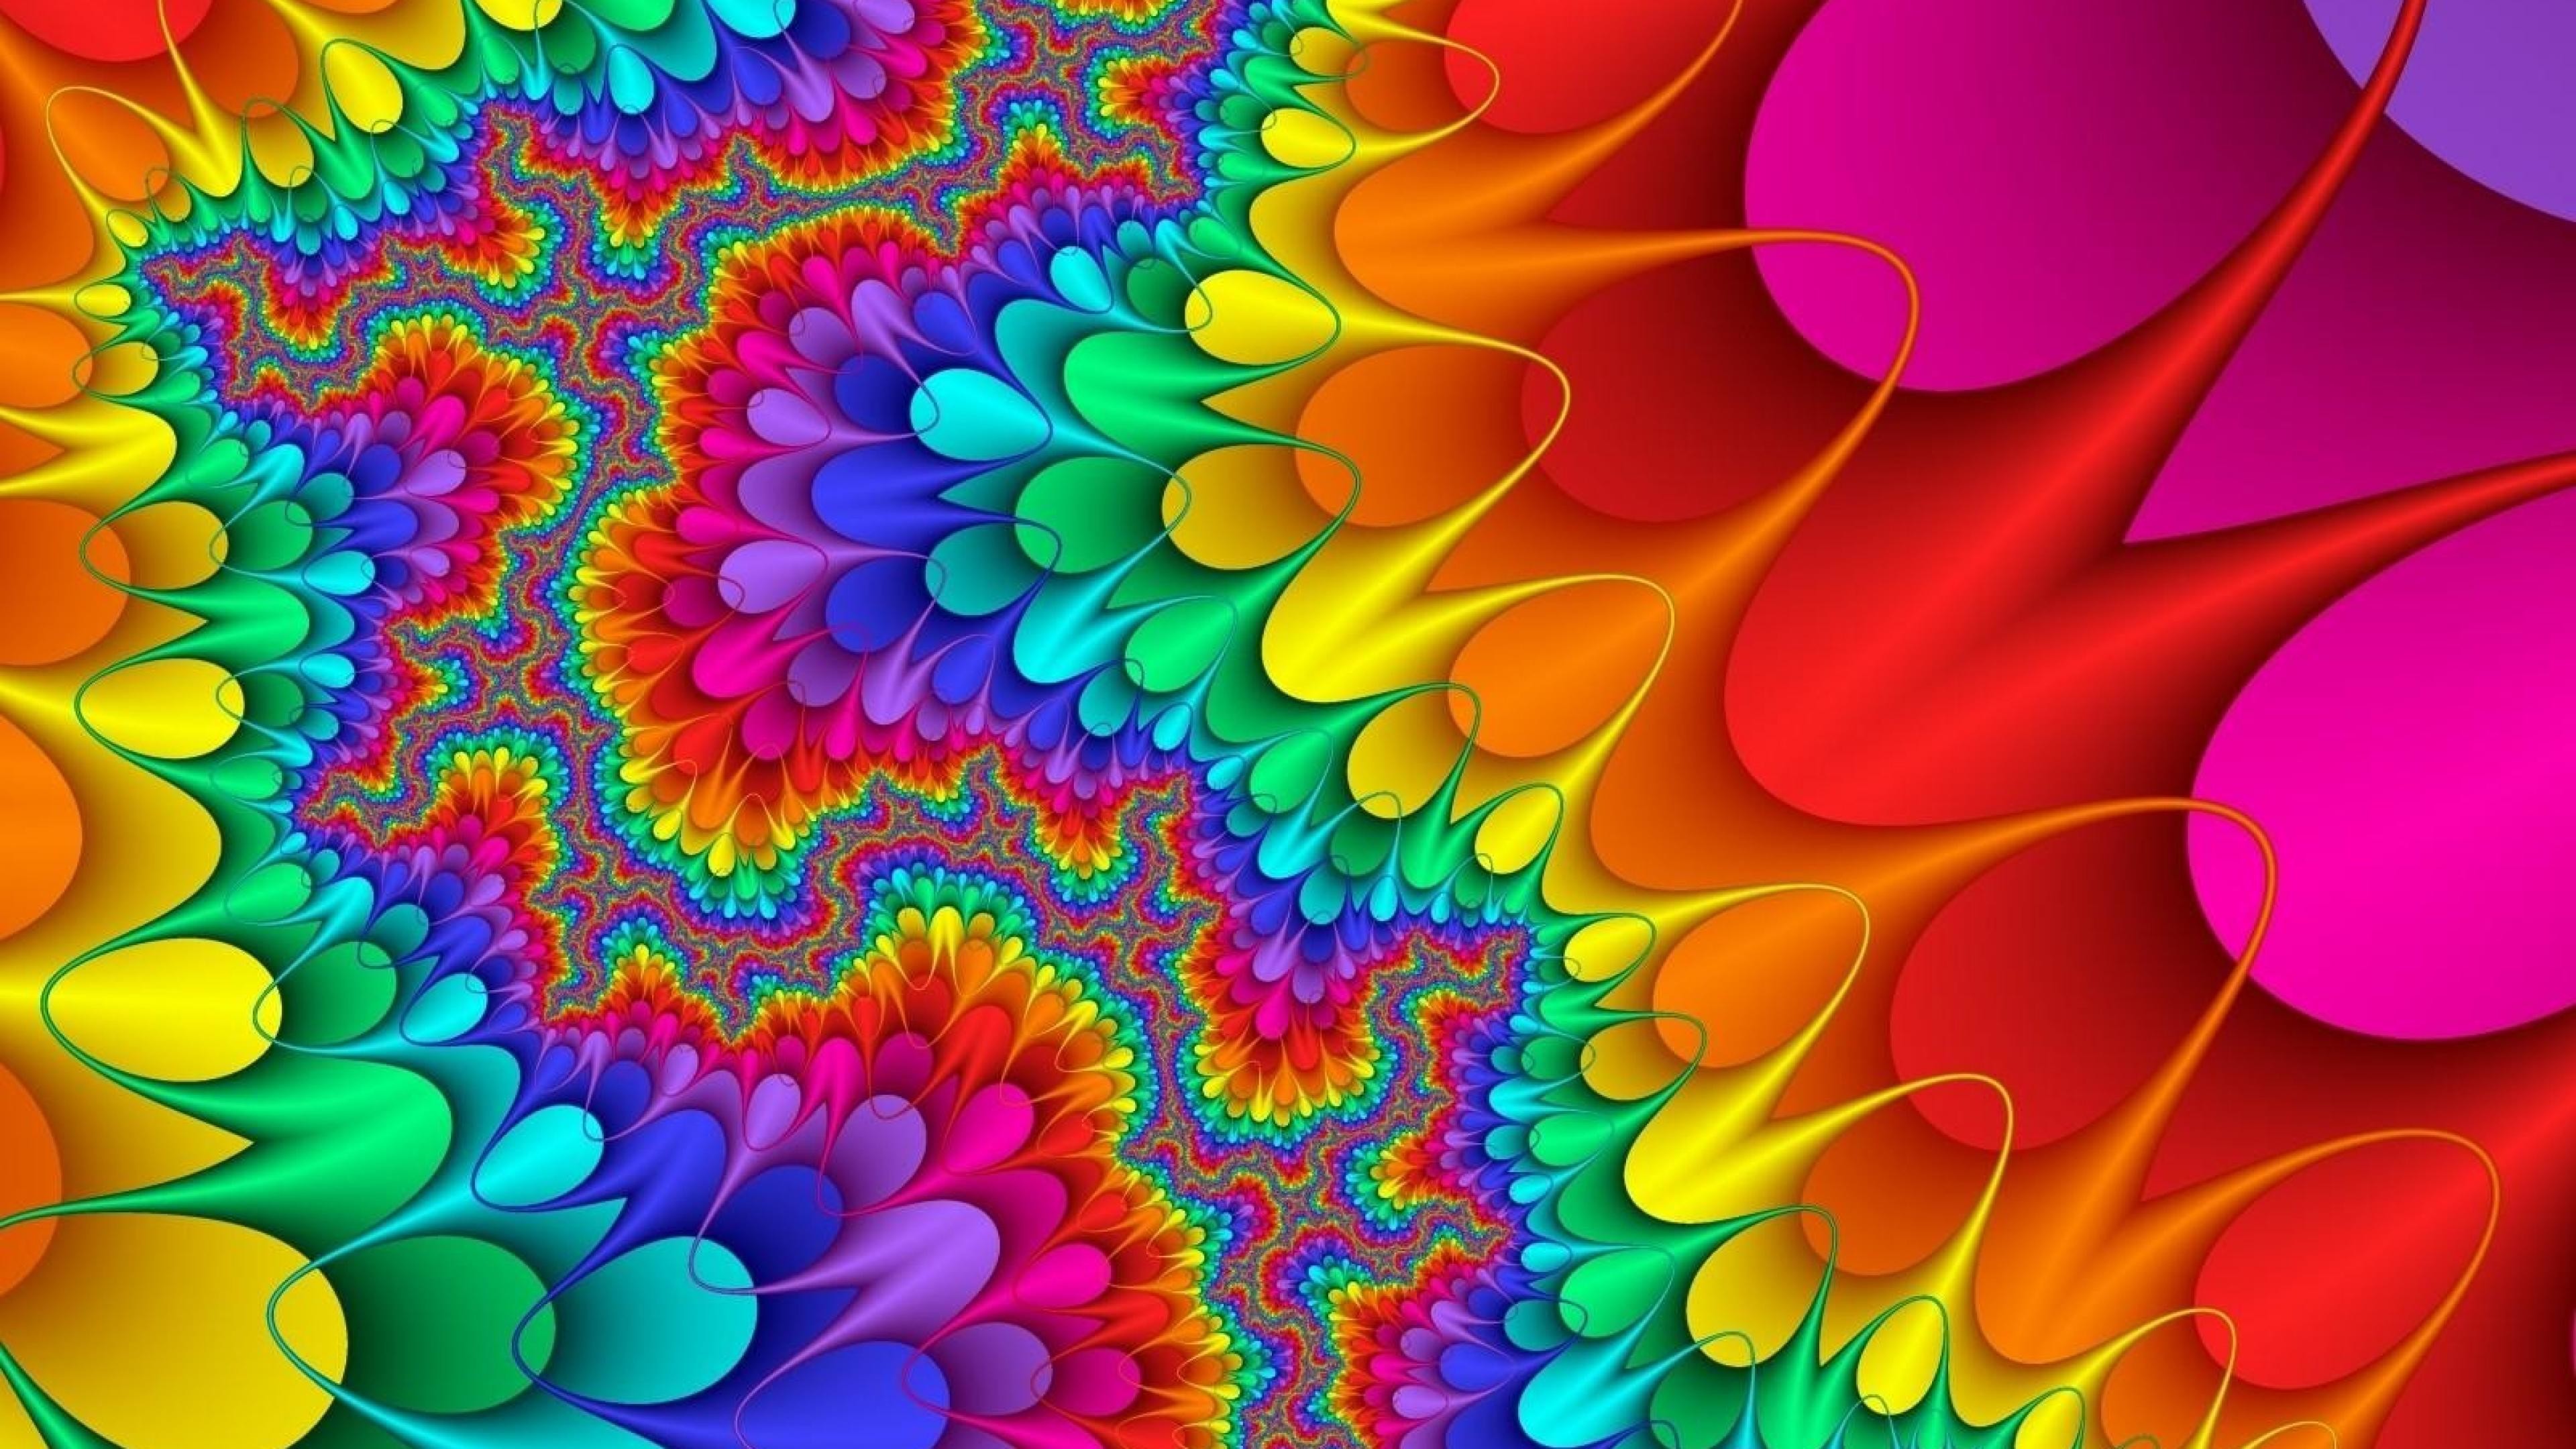 3840x2160 Abstract Wallpaper with Palette Fractal in Colorful | HD Wallpapers .